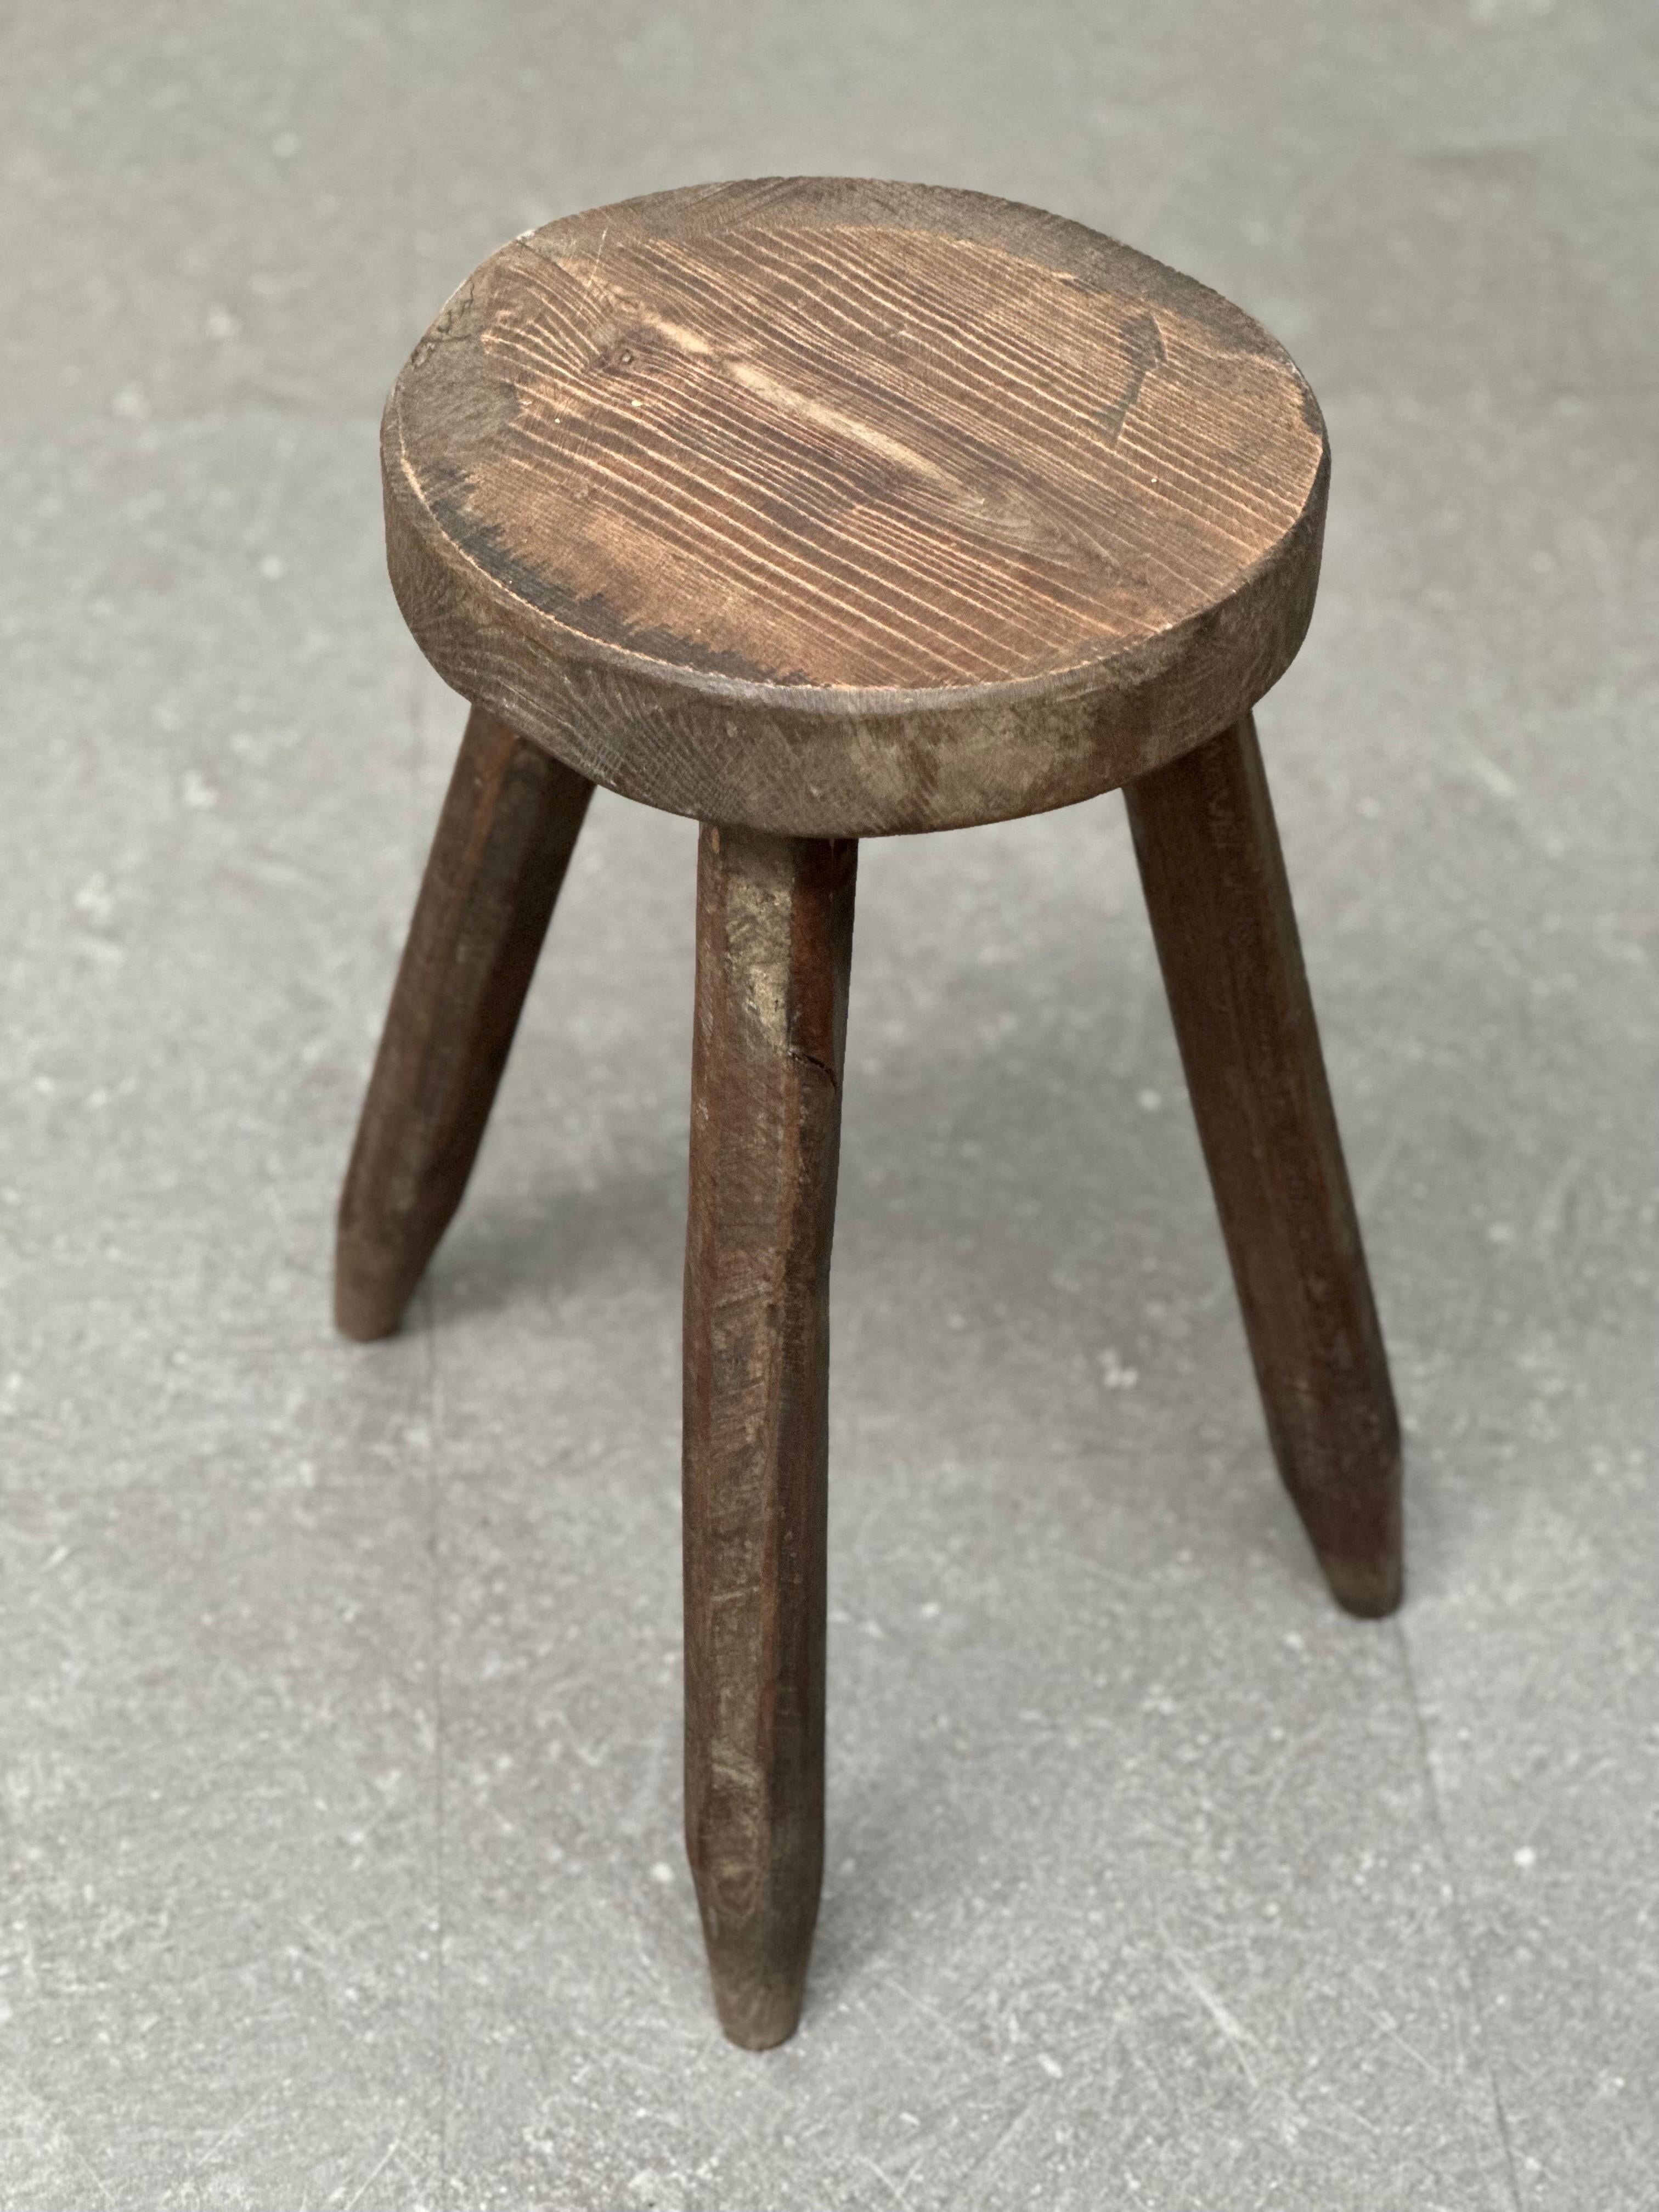 Mid-20th Century French Brutalist Tripod Stool, 1960s - Embrace the Charm of Primitive Elegance For Sale